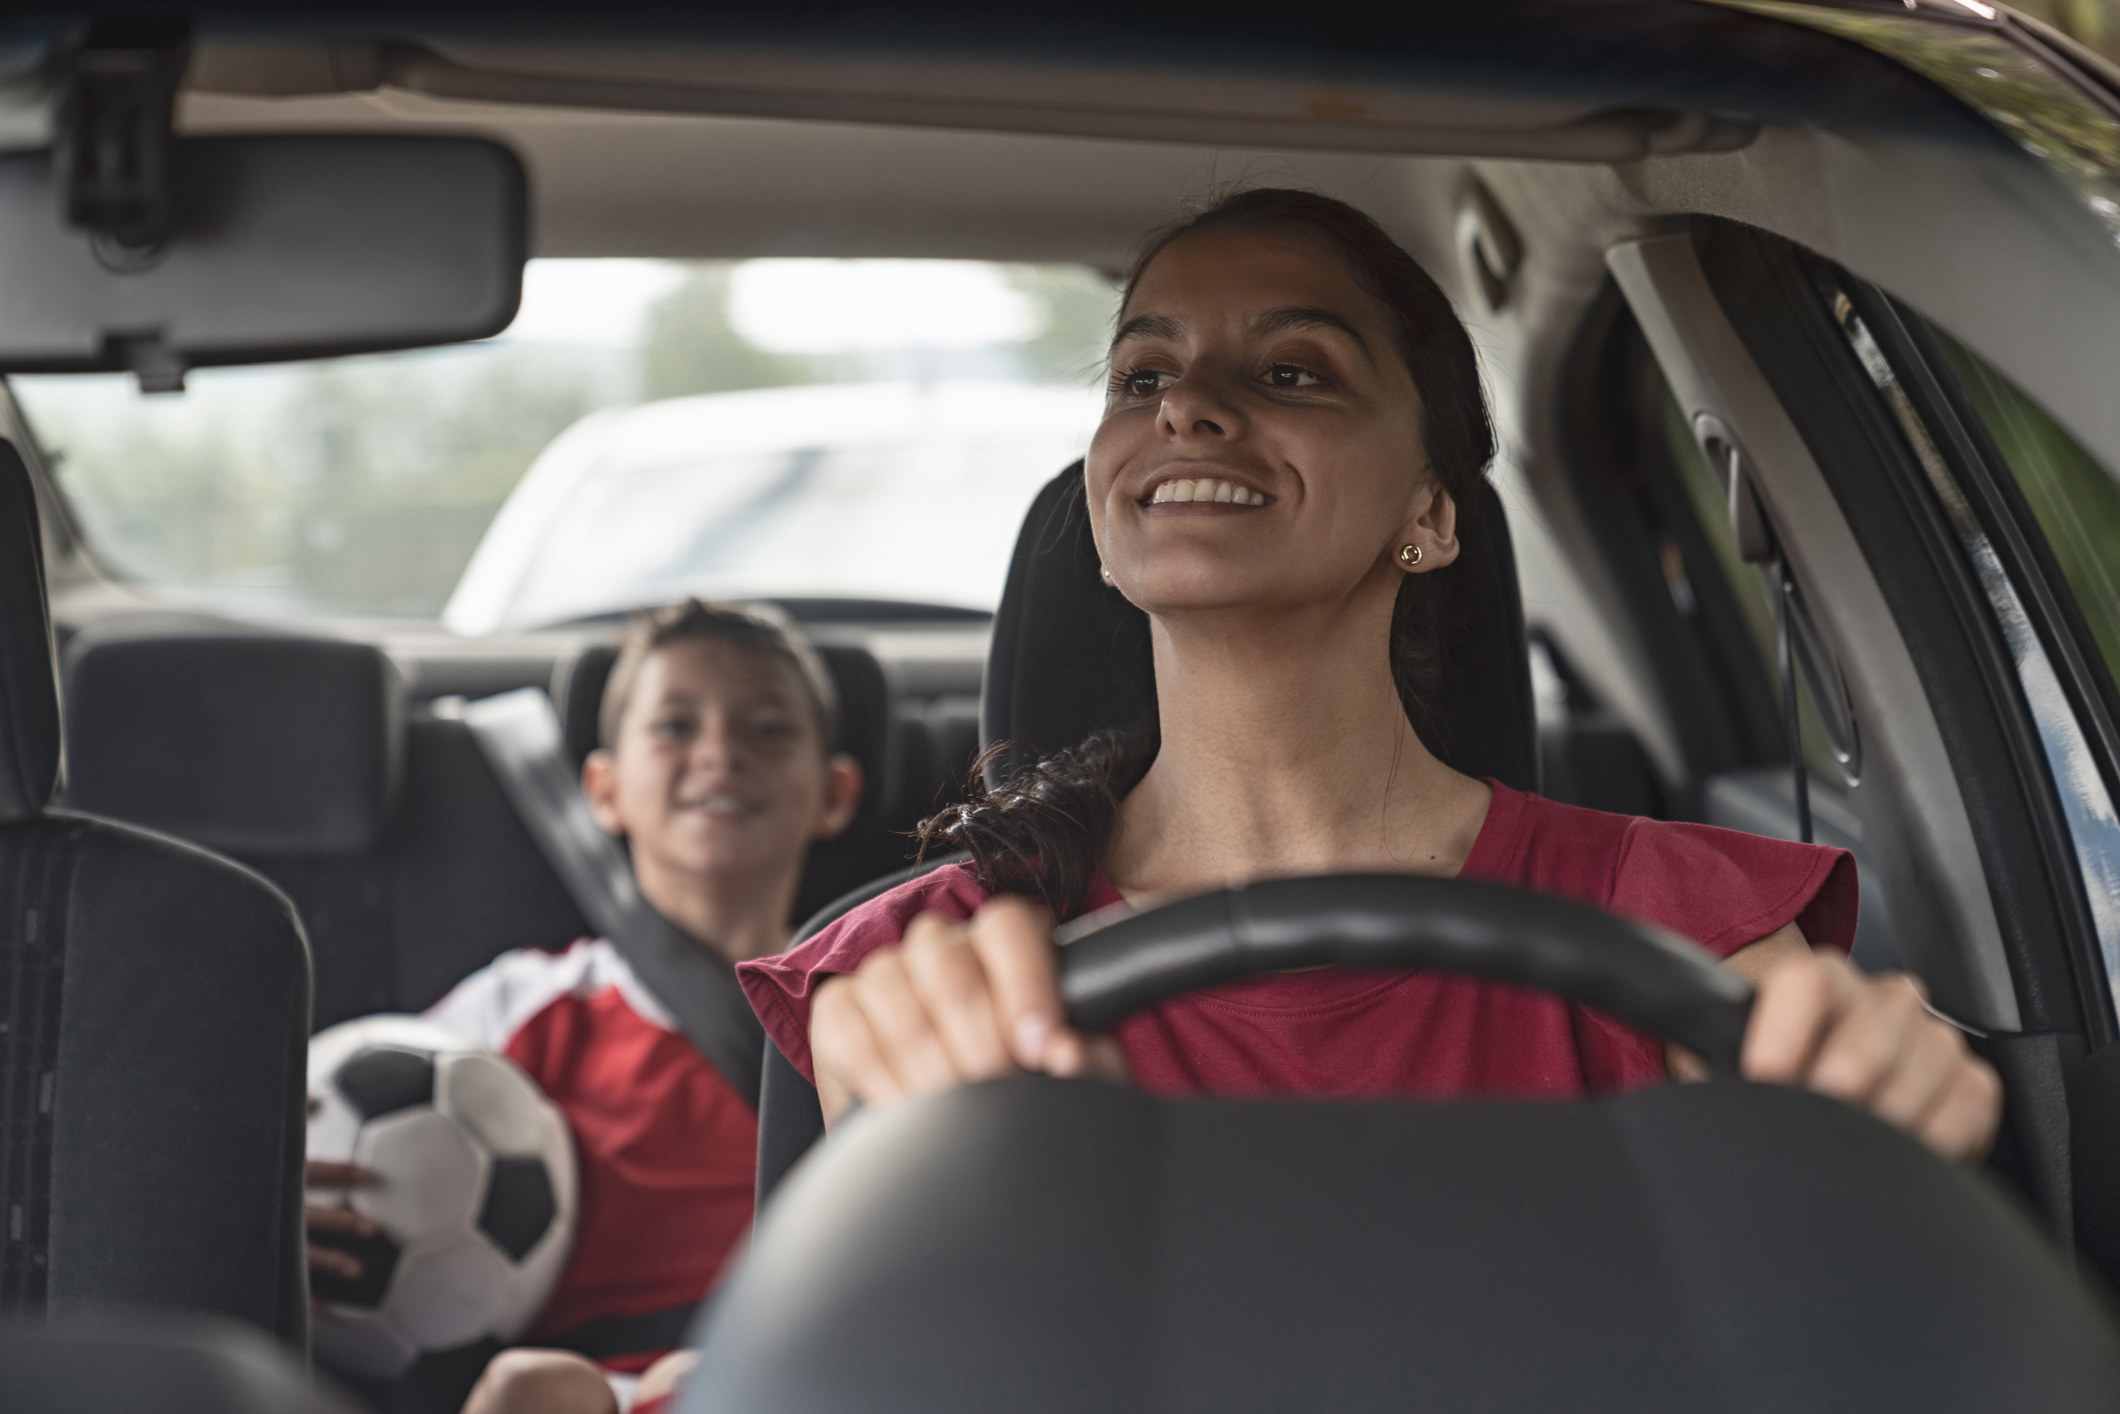 A mother looking at her son in the backseat of a car, as he holds a soccer ball